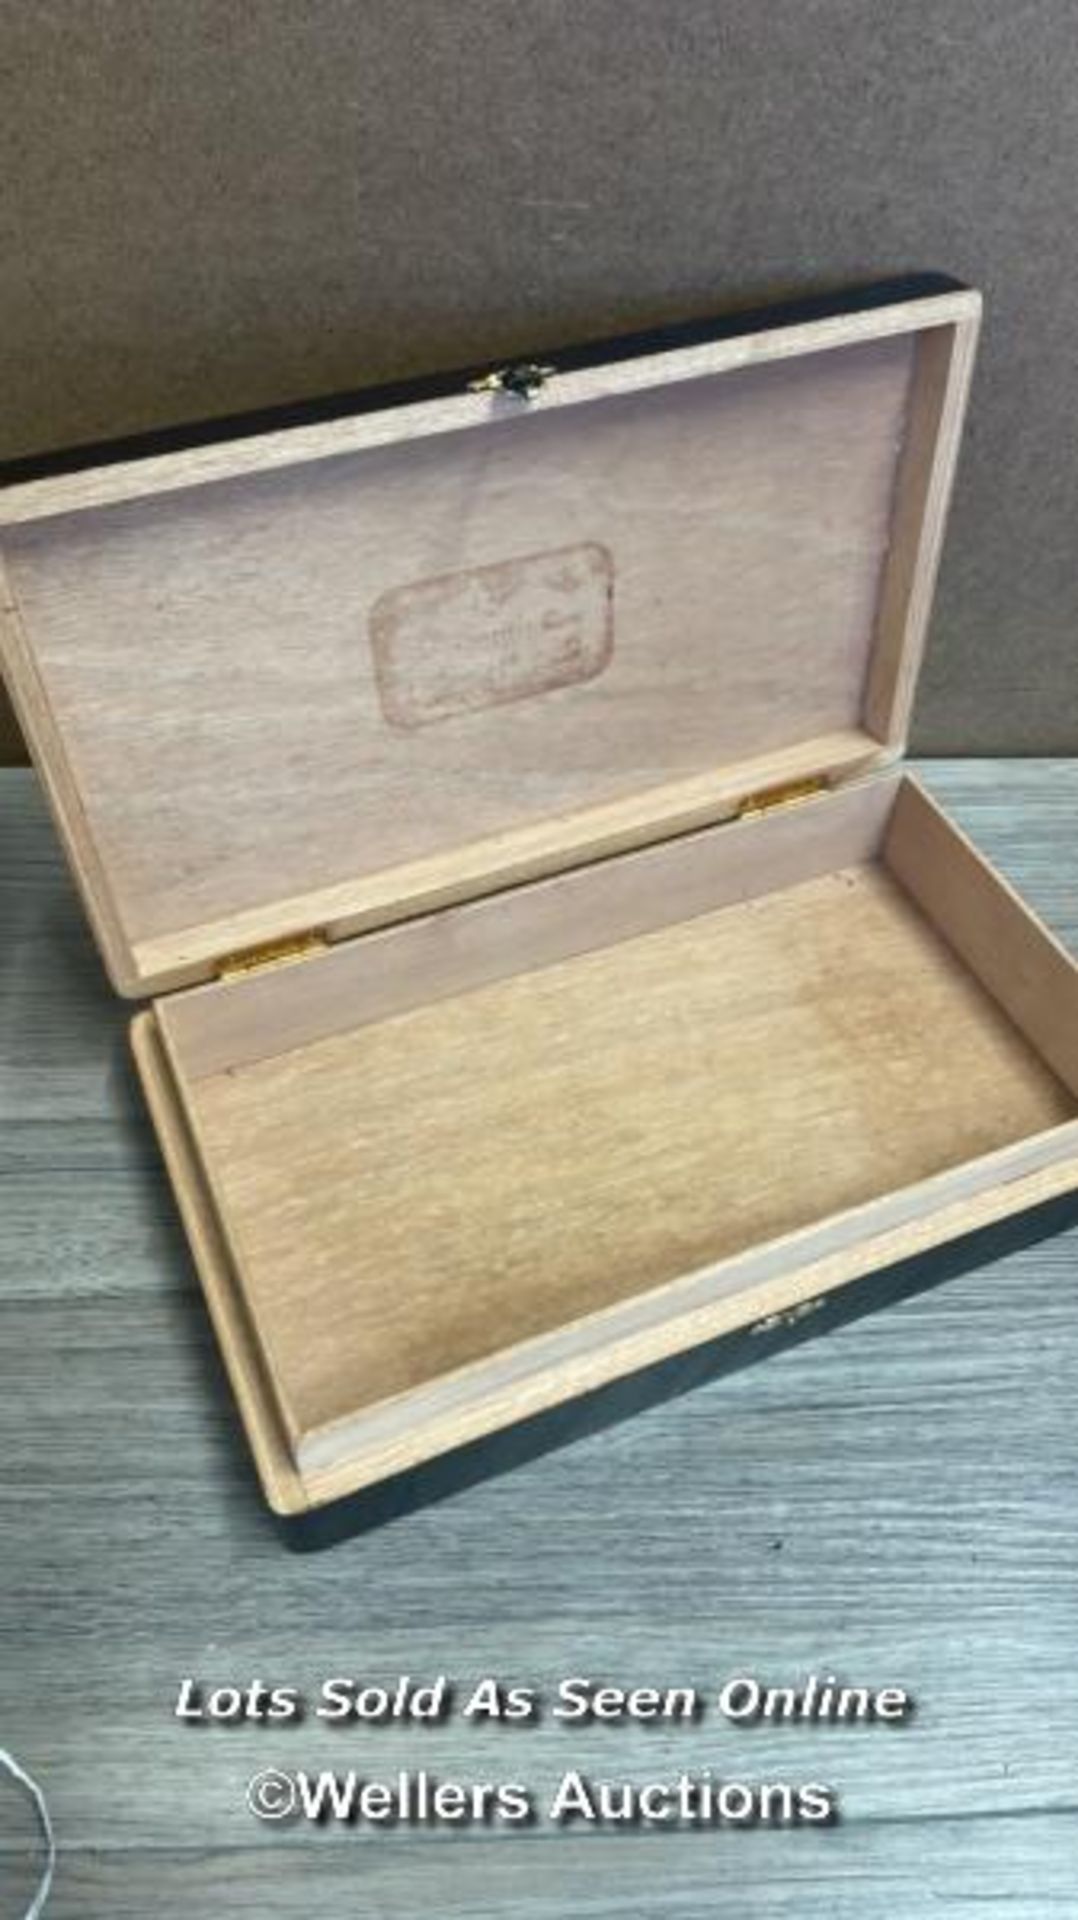 TWO COLLECTABLE EMPTY HABANA CIGAR BOXES, CATCHES & HINGES IN GOOD ORDER - Image 2 of 4